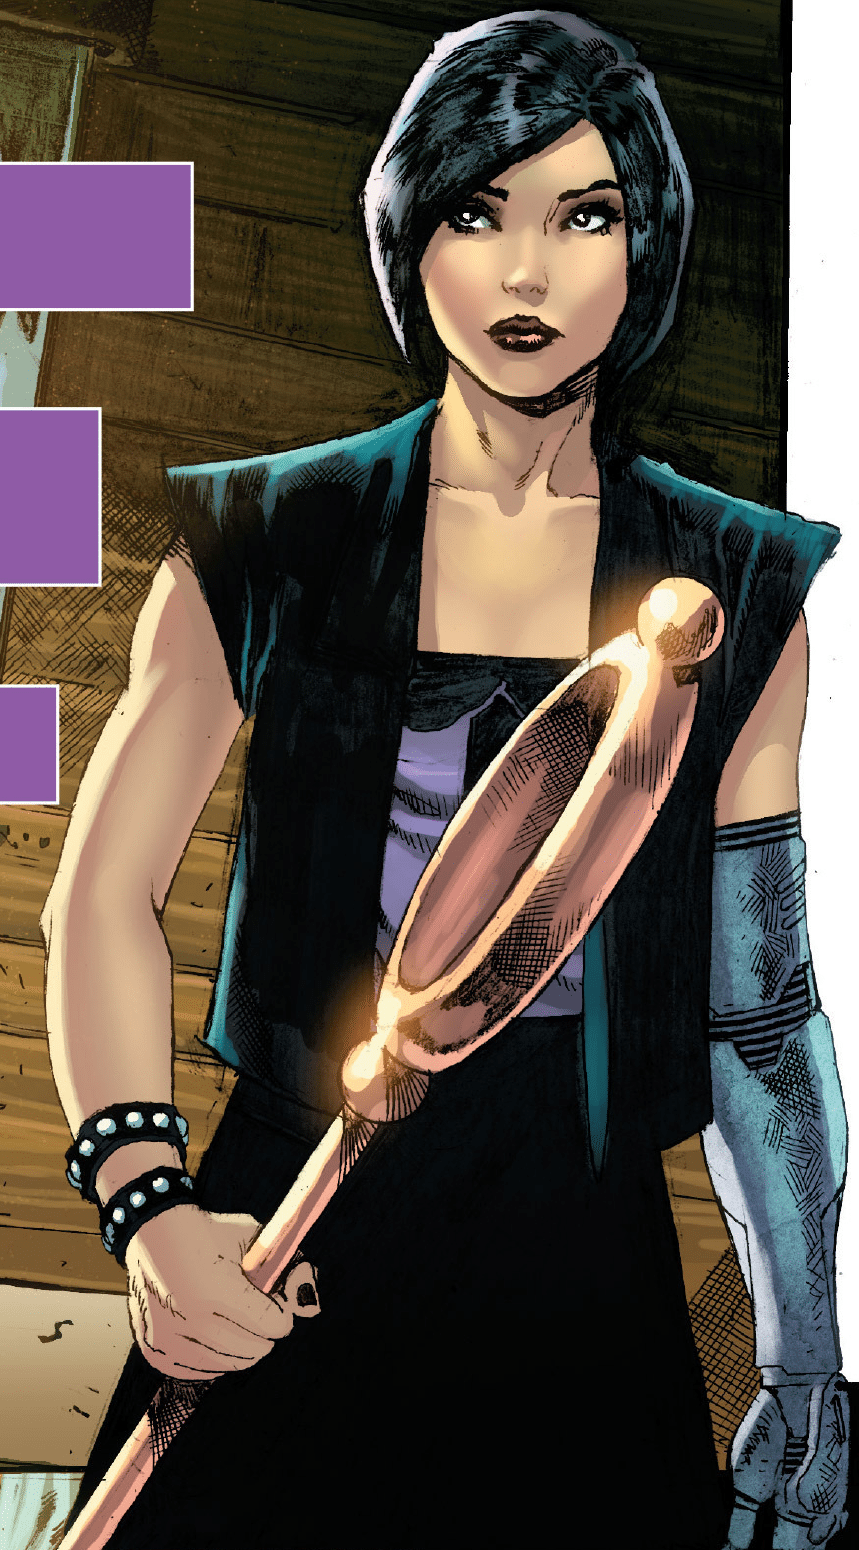 41 Hot Pictures Of Nico Minoru That Will Make You Begin To Look All Starry Eyed At Her 36